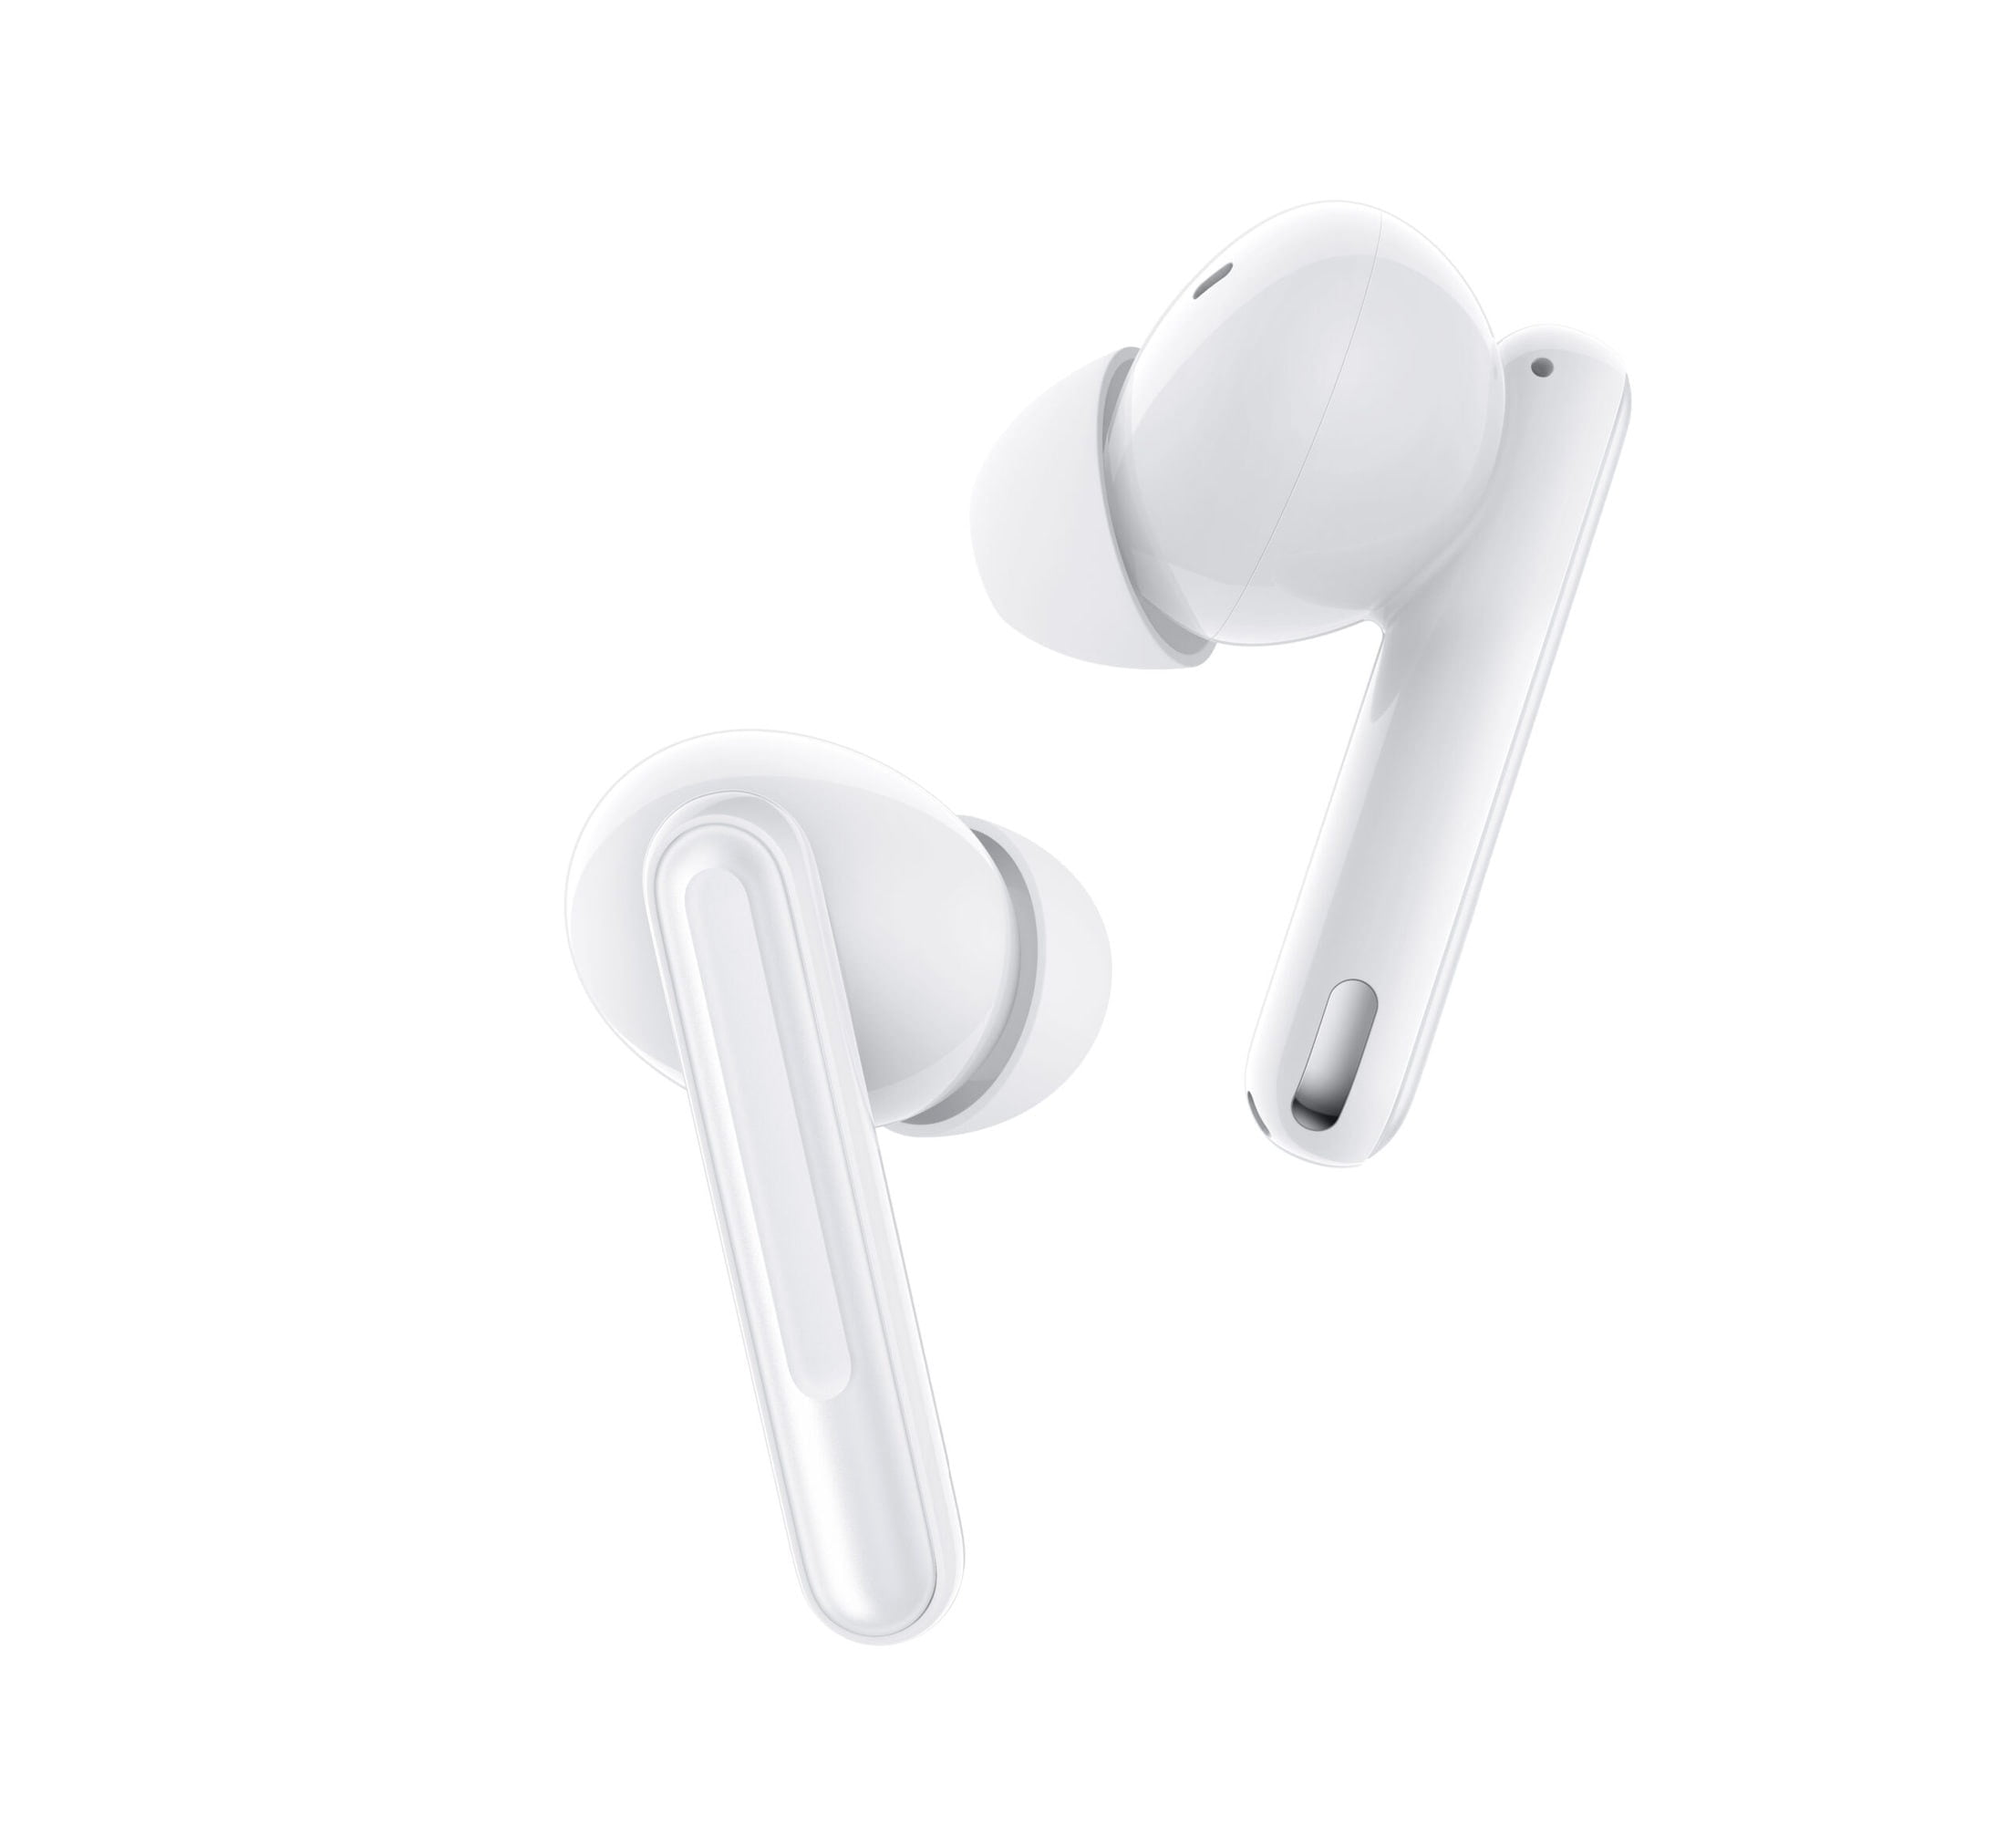 White pack 1 scaled - OPPO Enco Free2 earbuds announced for £89 with ANC - Cheaper & different design vs Enco Free